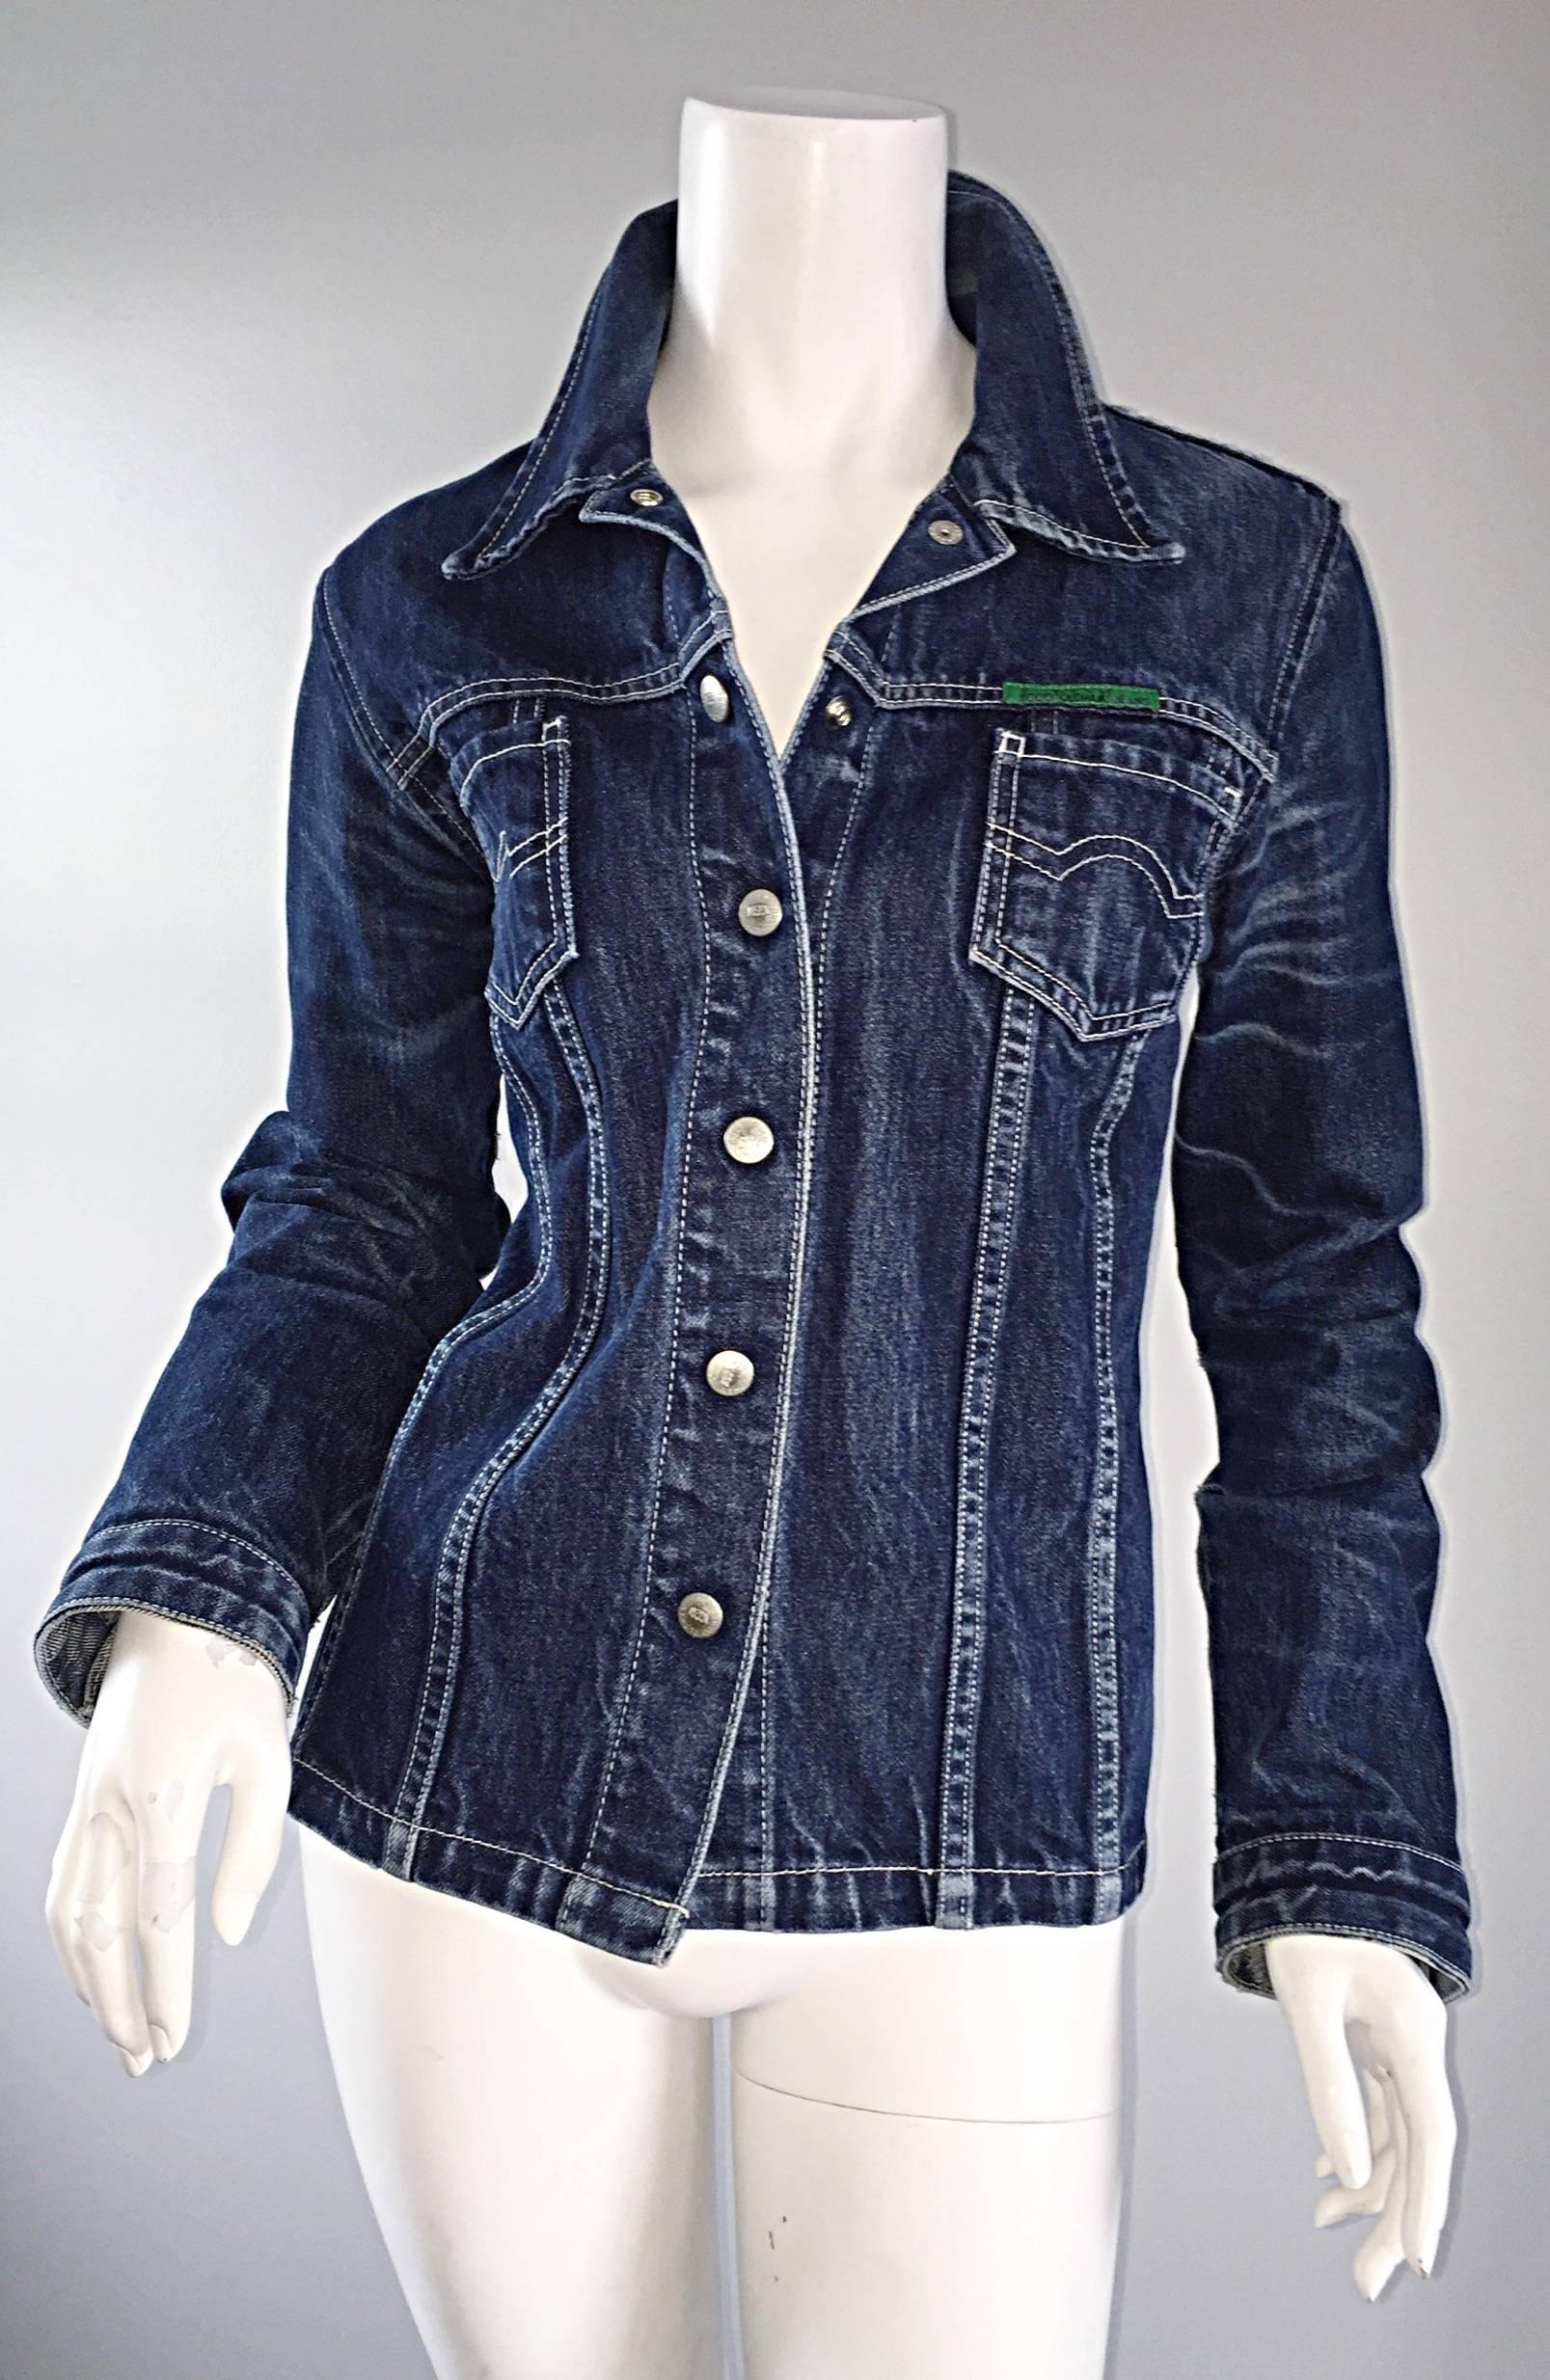 The perfect denim jacket! Vintage TODD OLDHAM blue jean denim shirt jacket! Amazing style, that makes this so much more than just a basic denim jacket. Tailored fit, with strong snap buttons up the bodice, and a mock belt on the back. Features